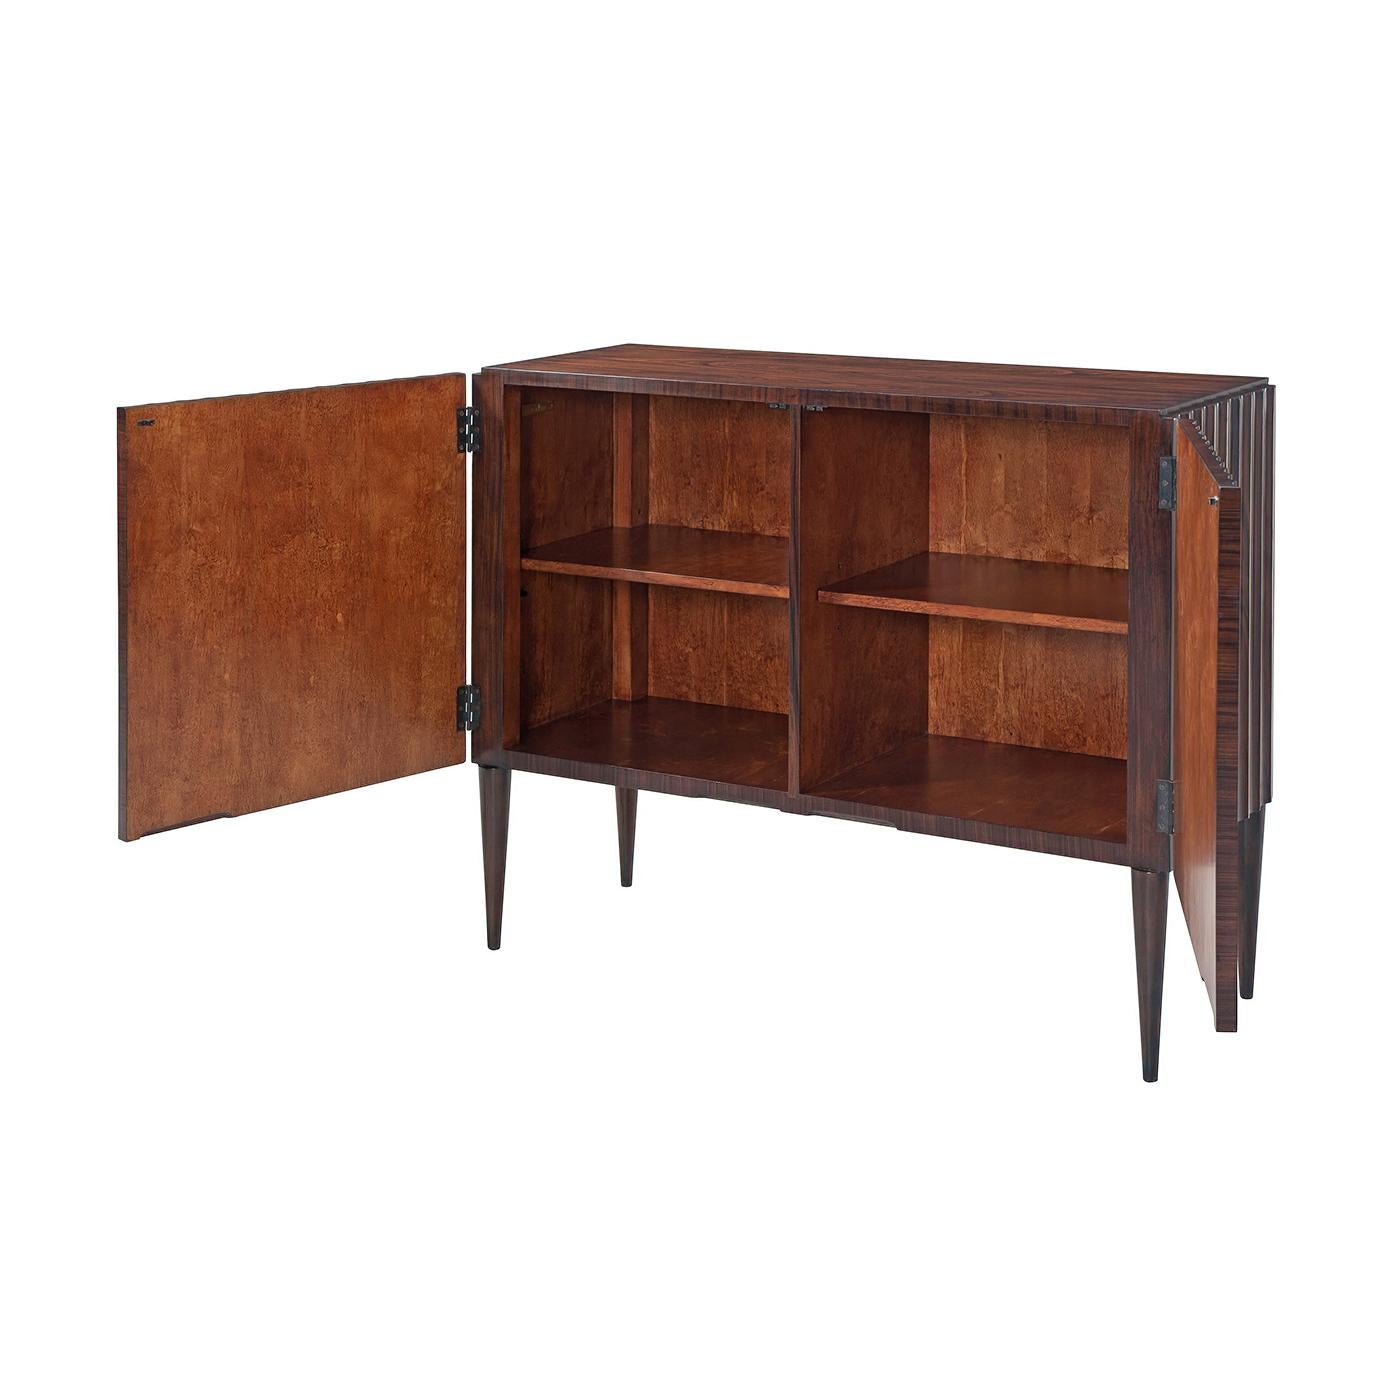 A fine midcentury style cabinet with fluted sides of morado, sycamore and mahogany with an interior fit with shelves and raised on turned and tapered legs.
Dimensions: 47.5